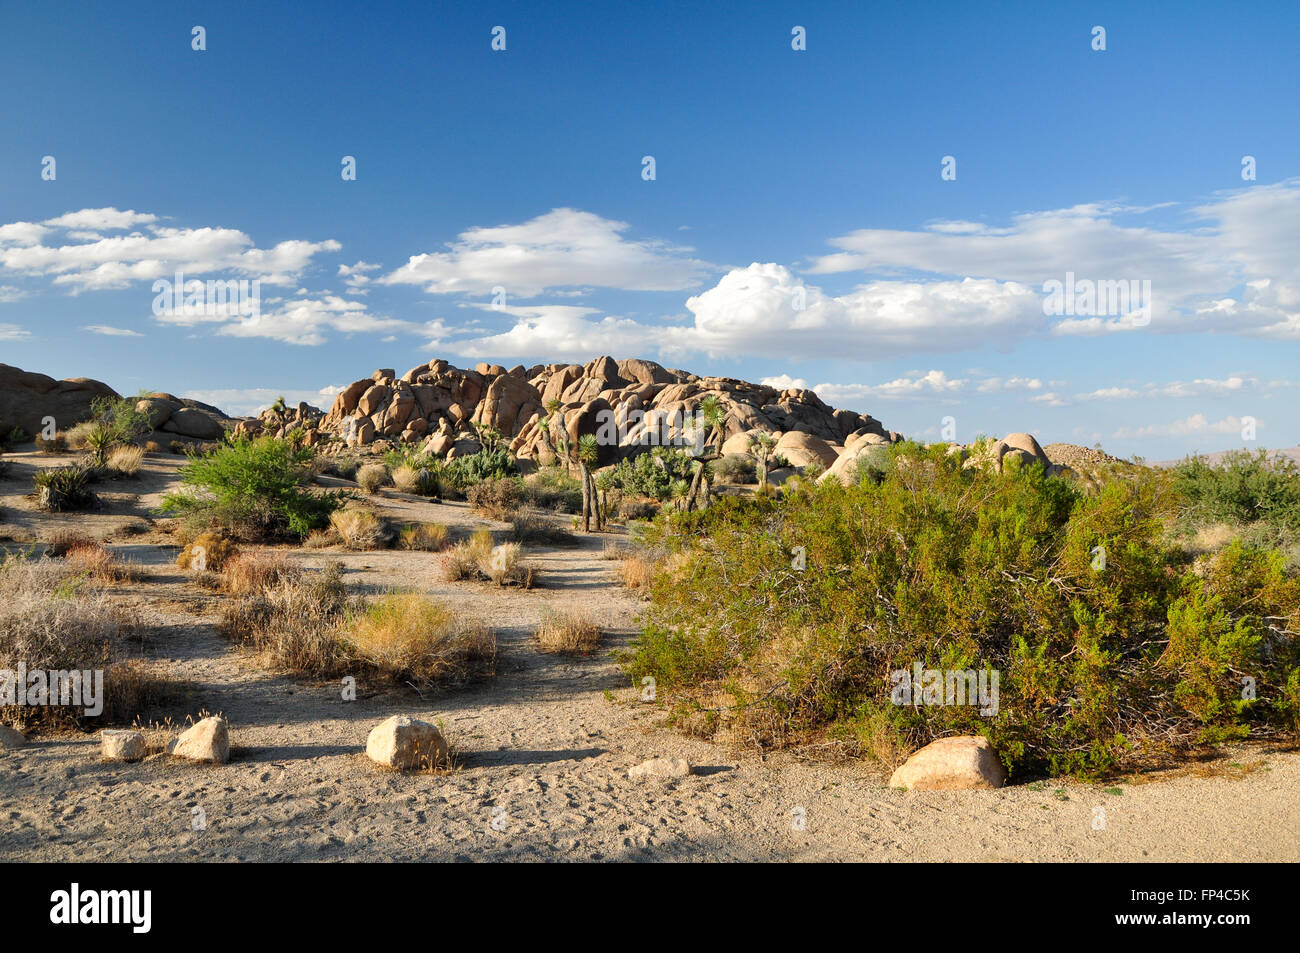 Landscape with Yucca Palm in Joshua Tree National Park Stock Photo